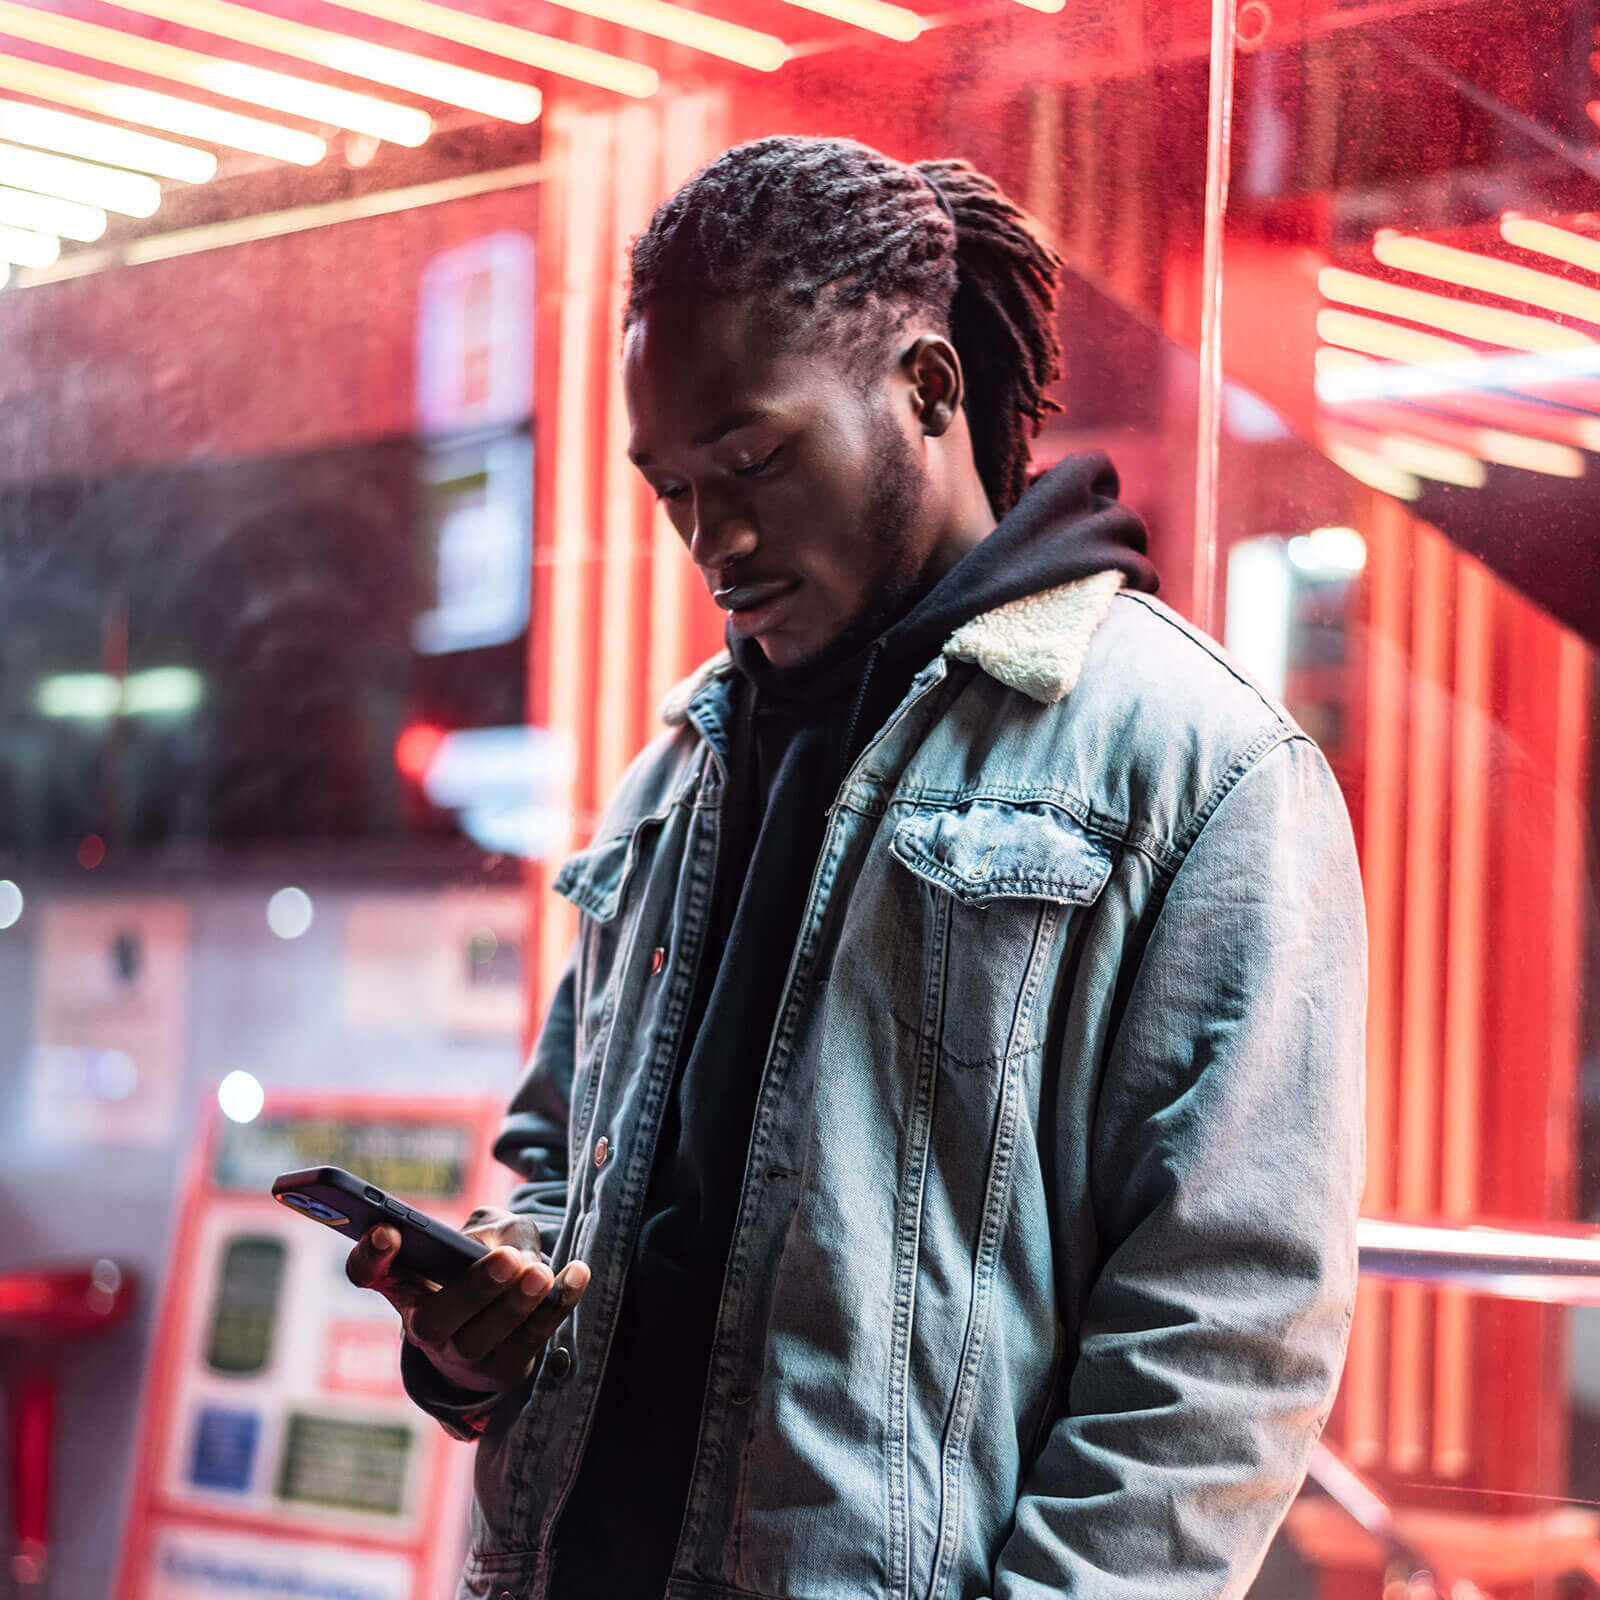 Man looking down at phone stood in front of neon lights